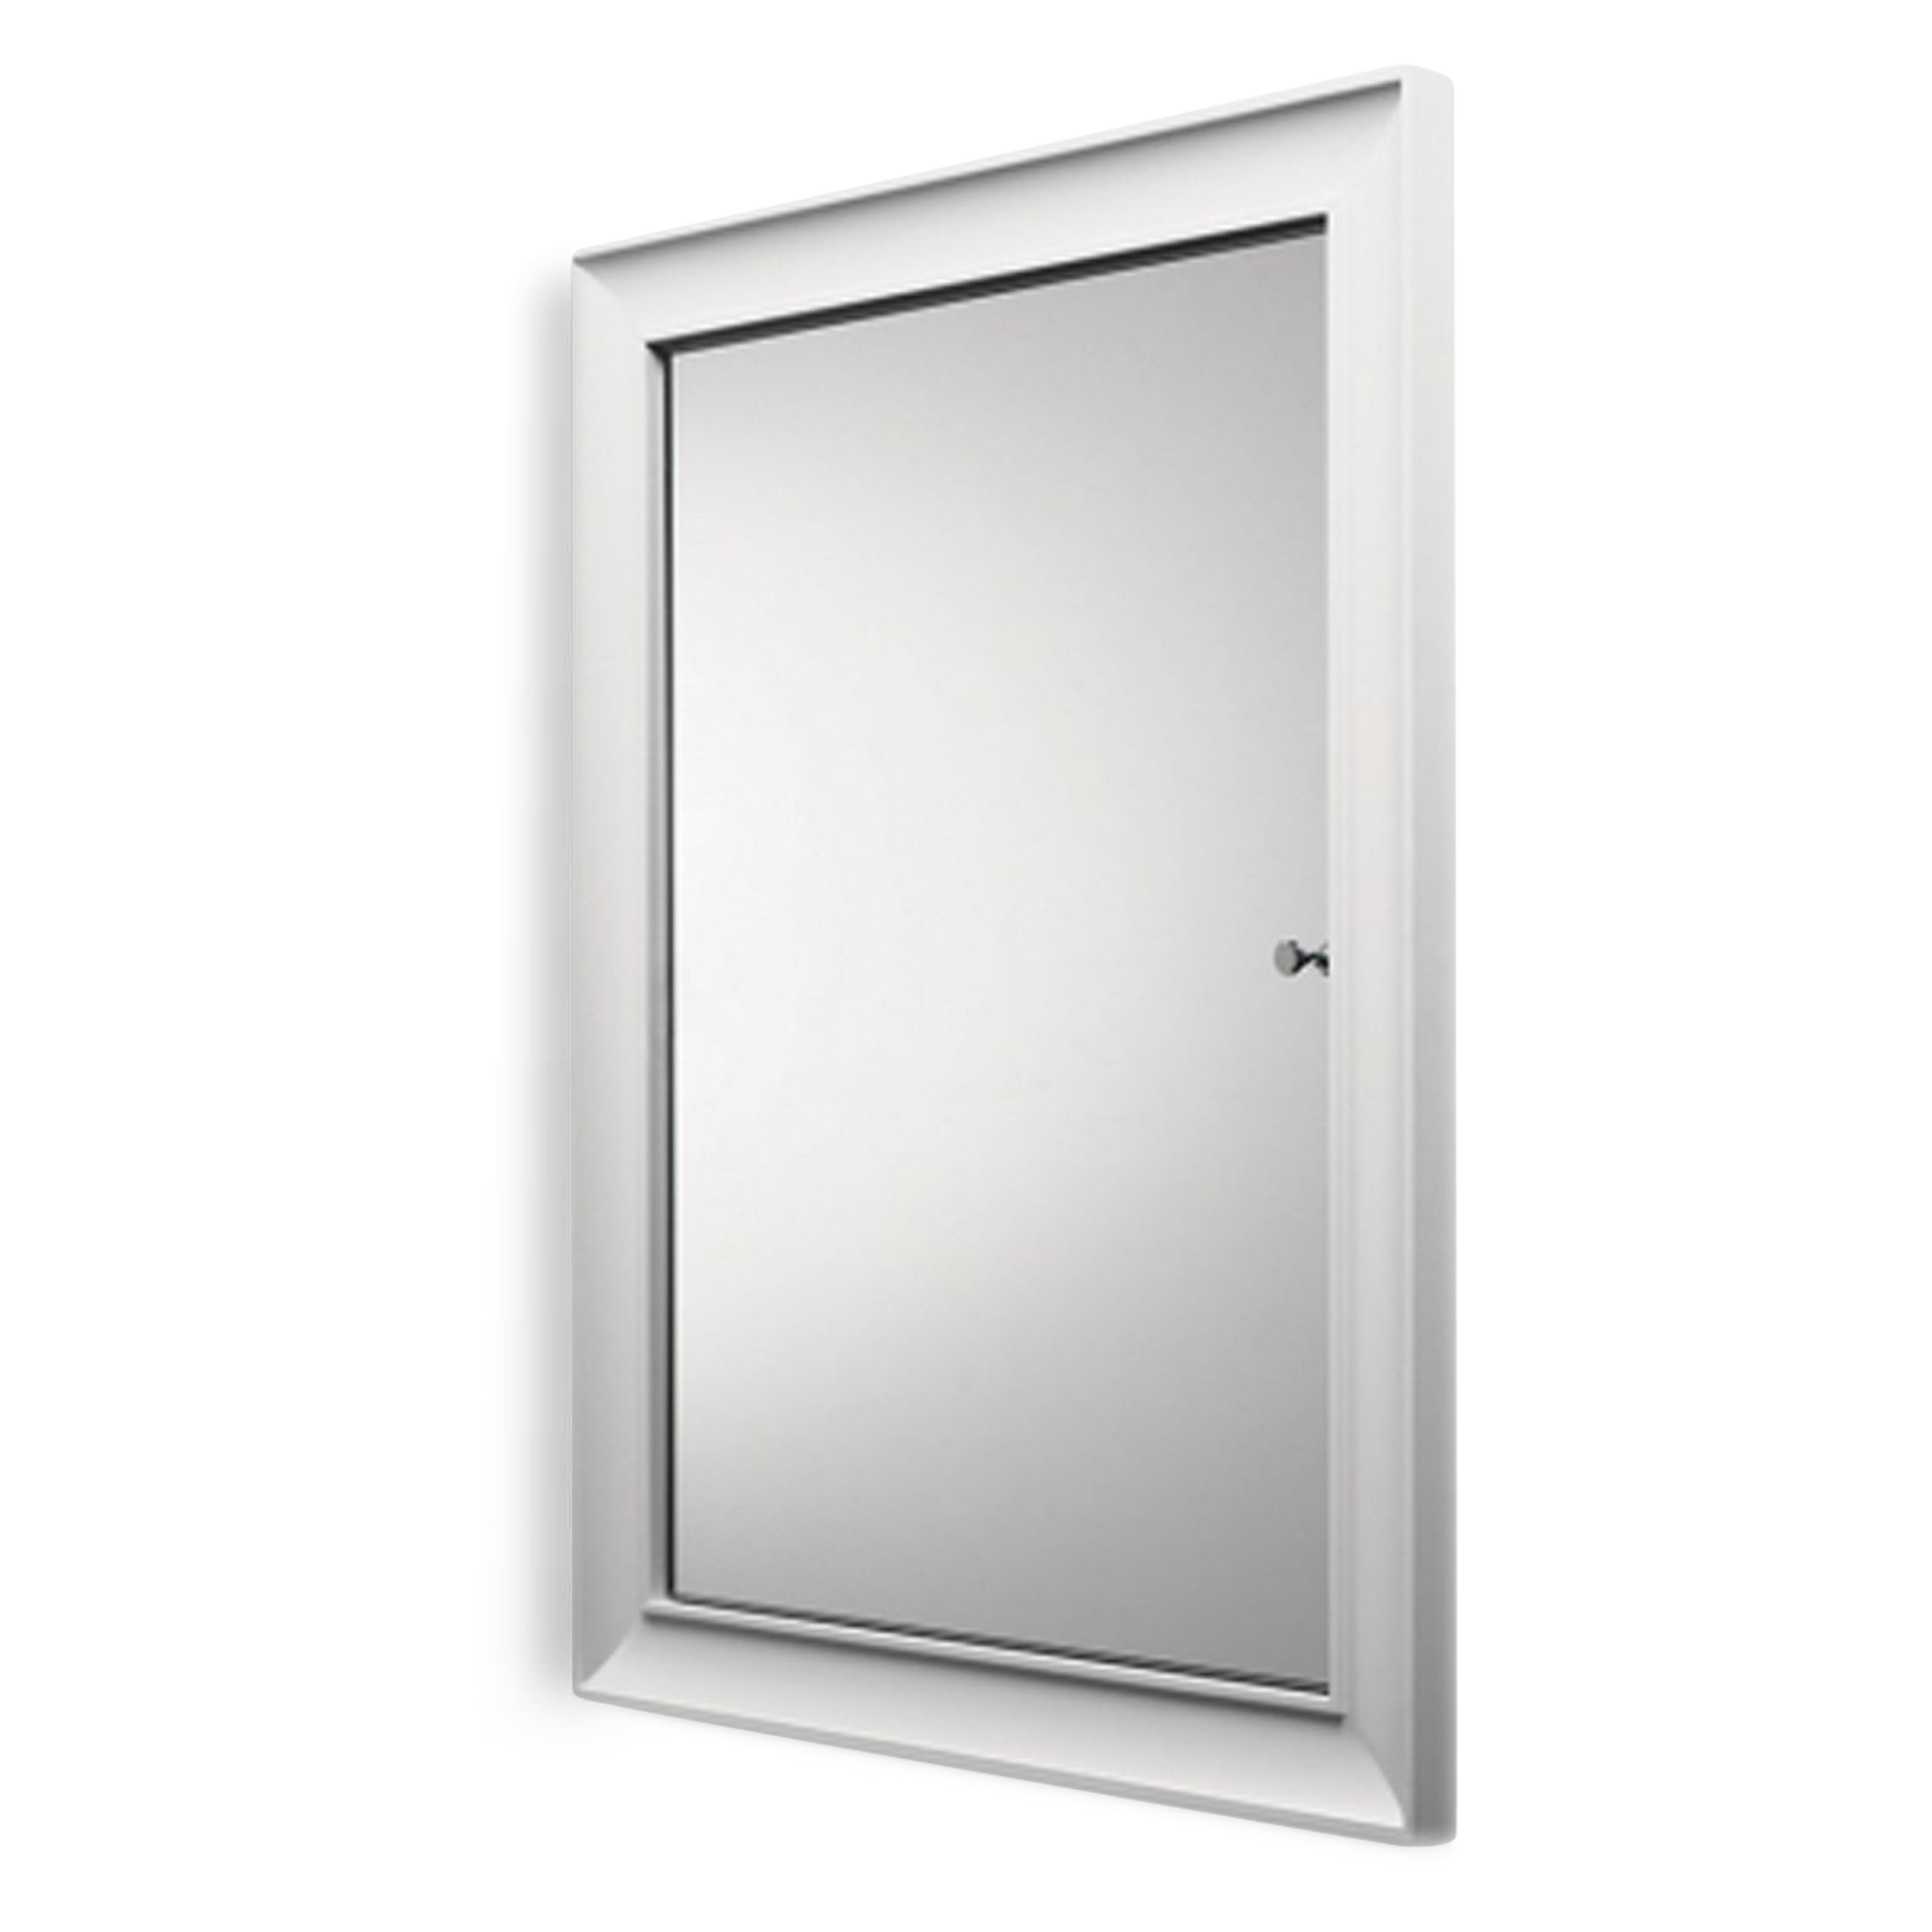 The Waterworks Modern Cabinet is a simple modern cabinet with classic appeal featuring a sleek mirror on the front.